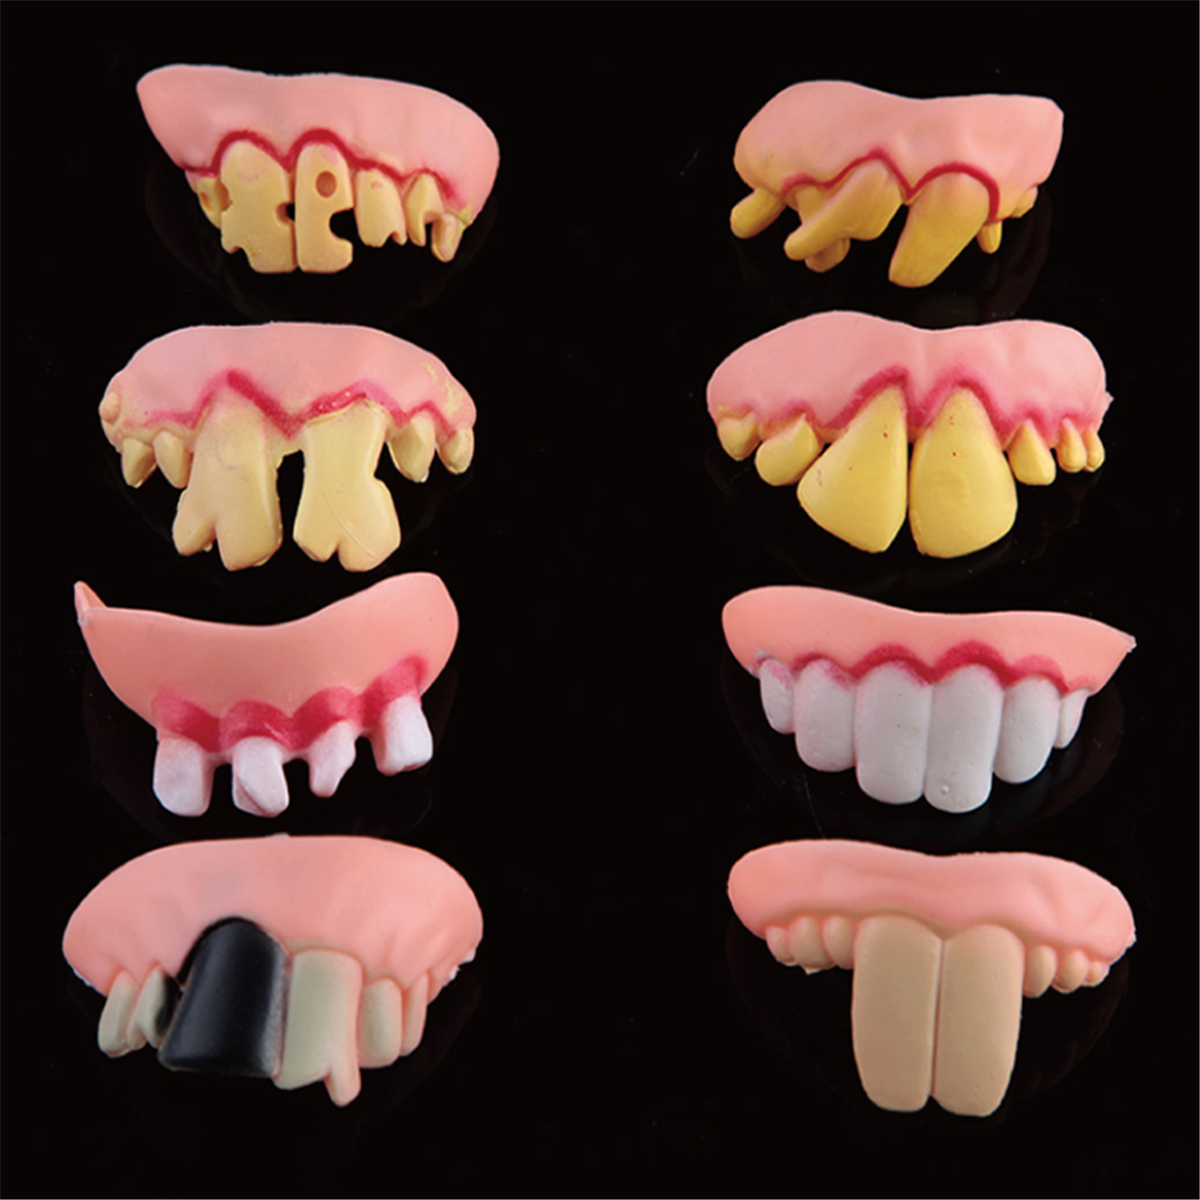 Halloween-Funny-Faked-Teeth-Makeup-Party-Masquerade-Prop-996123-4